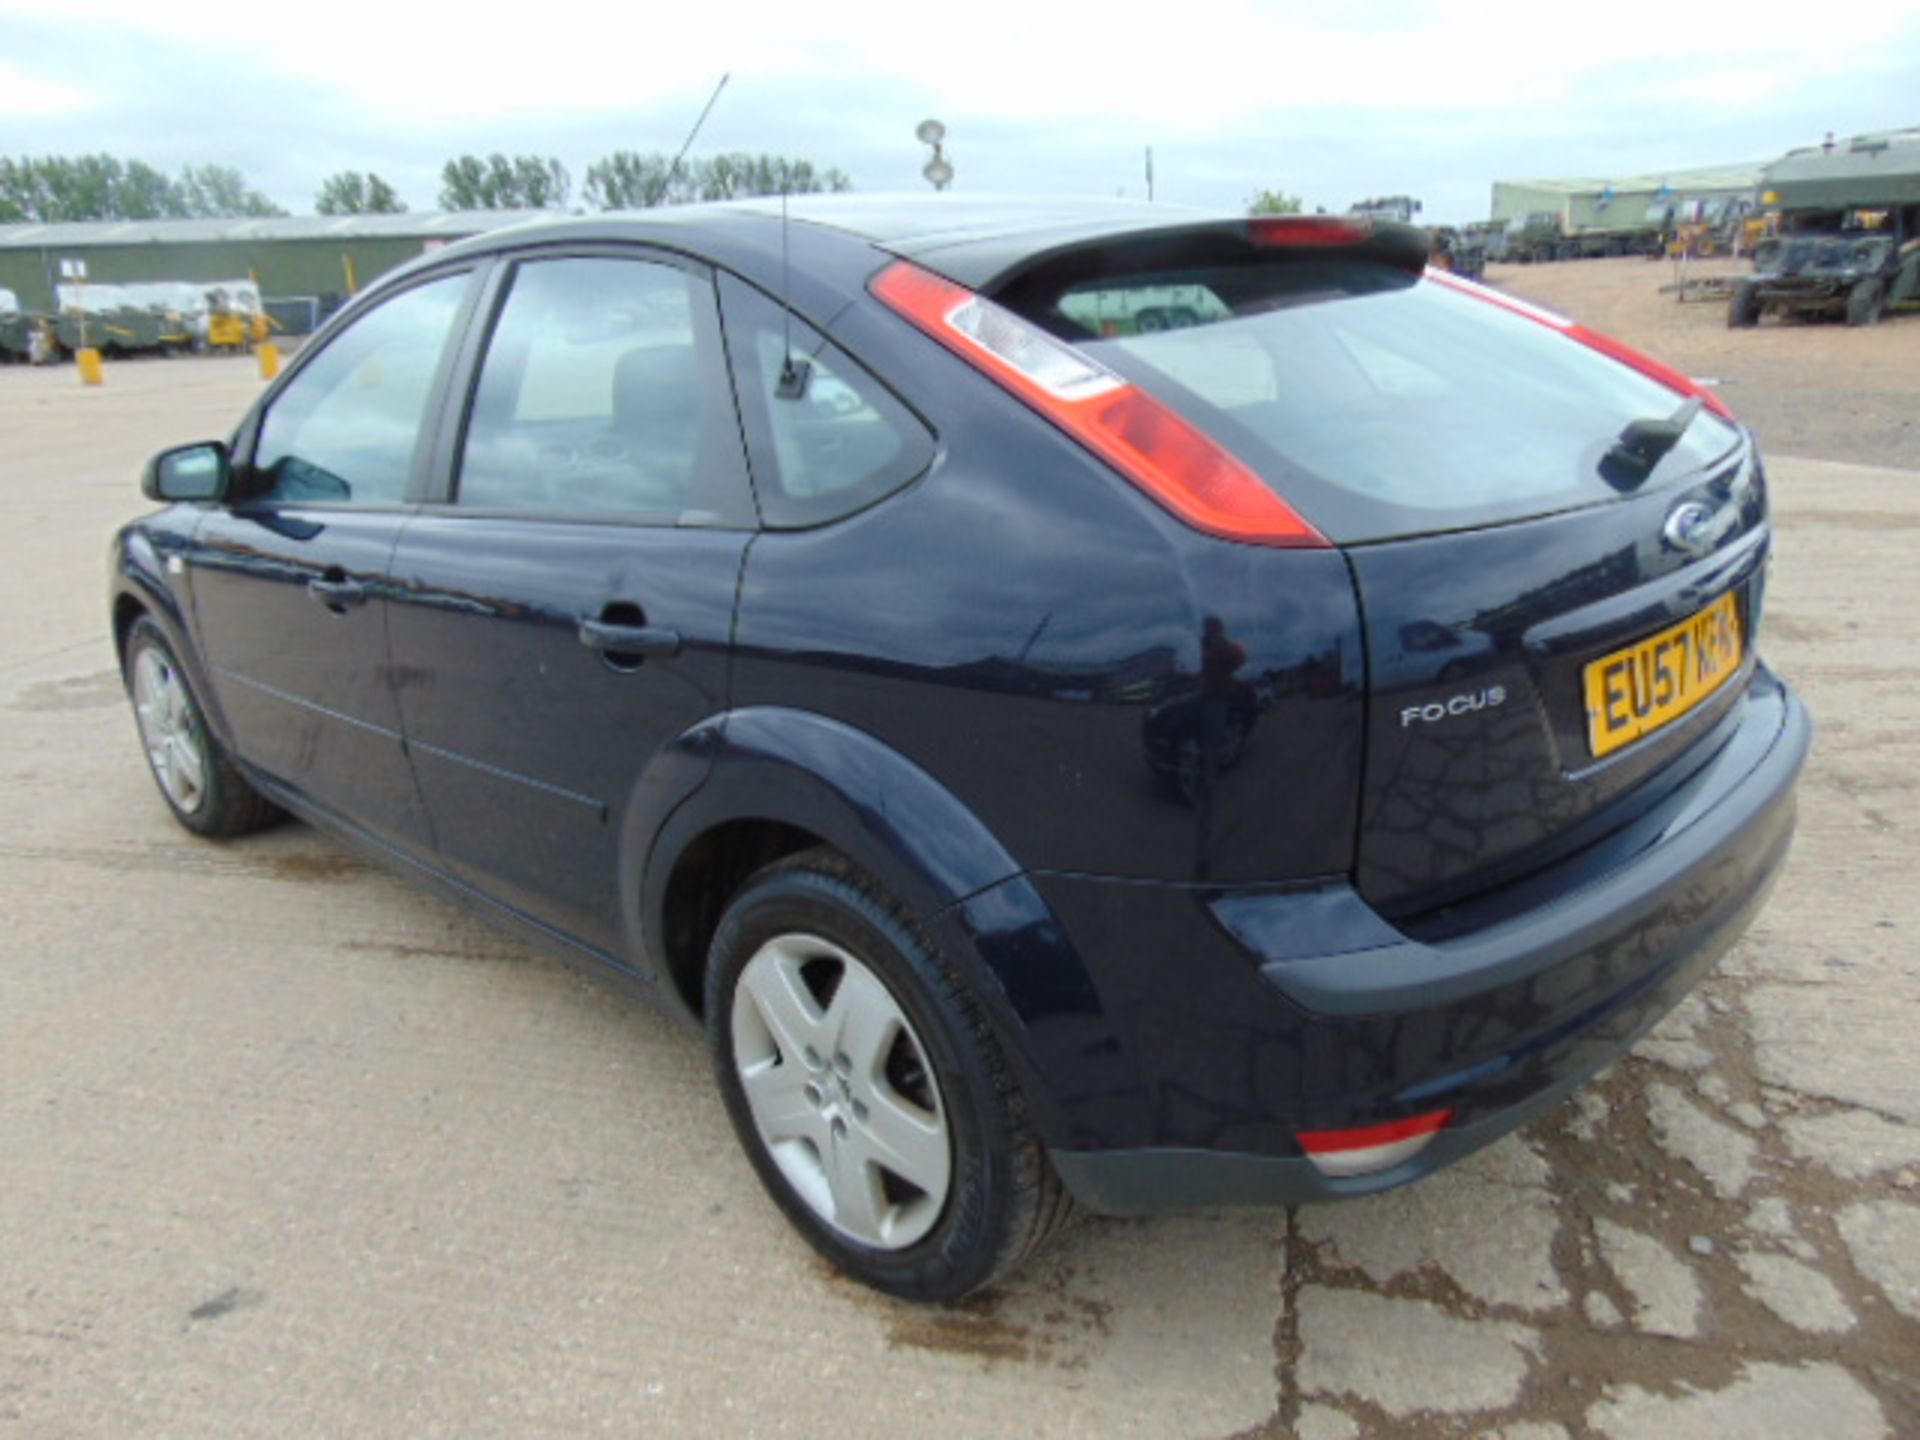 2008 Ford Focus 1.8 TDCI Style Hatchback - Image 8 of 18